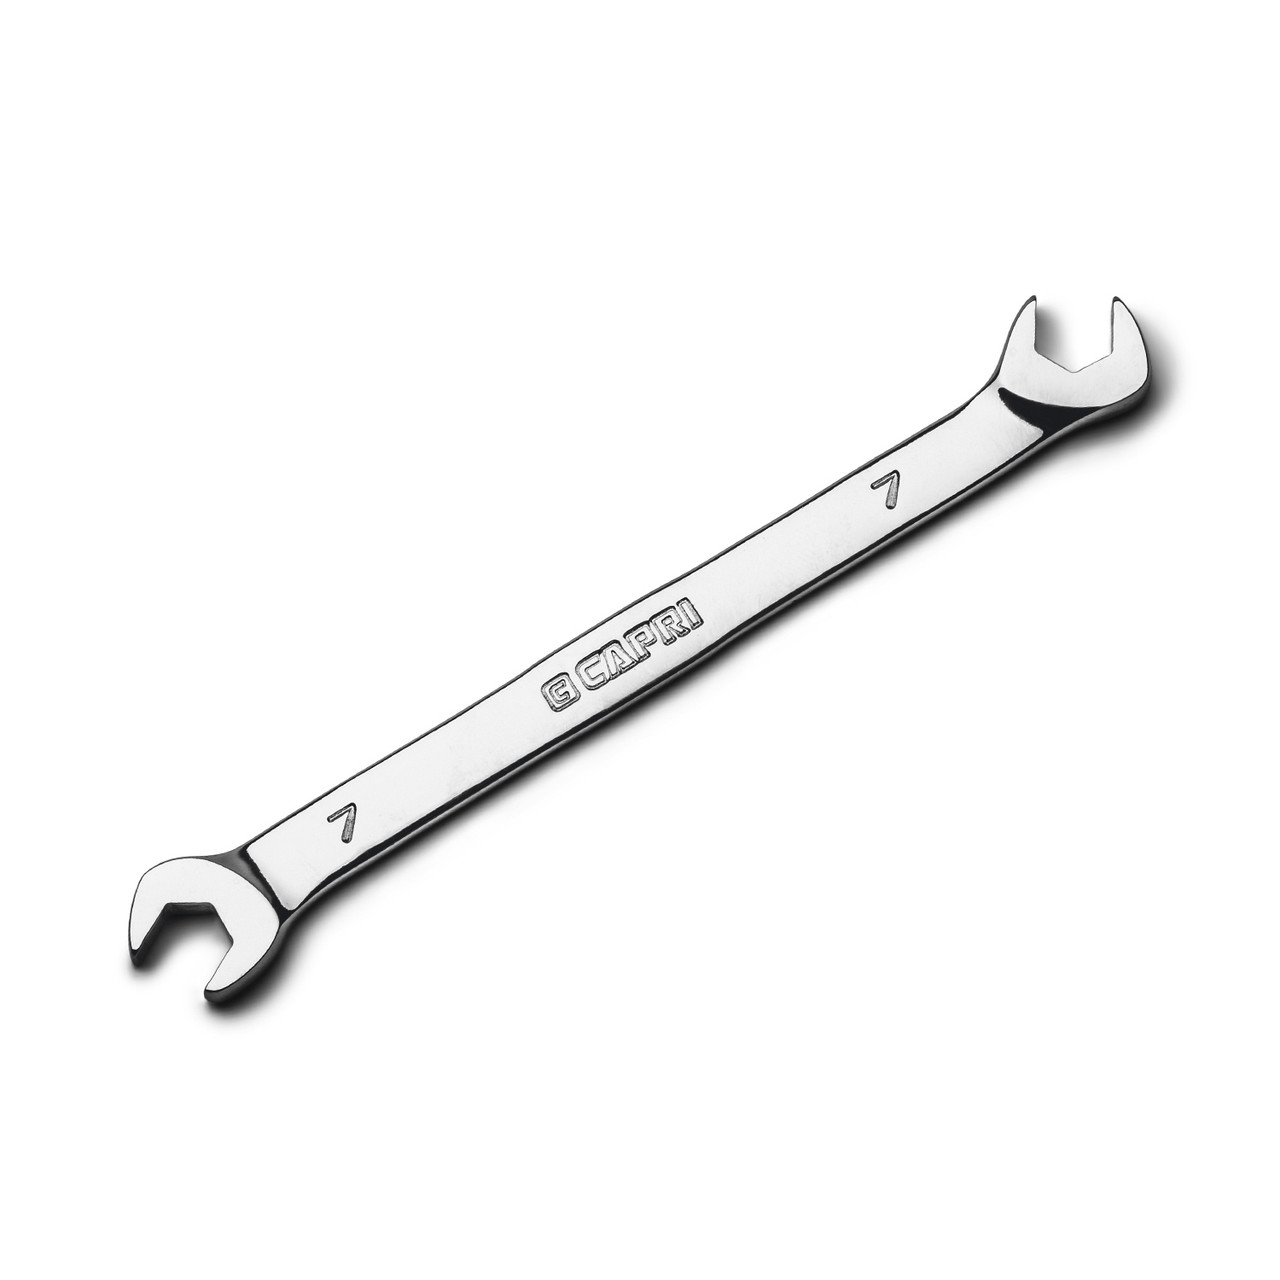 Capri Tools 7 mm Angle Open End Wrench, 30° and 60° angles, Metric